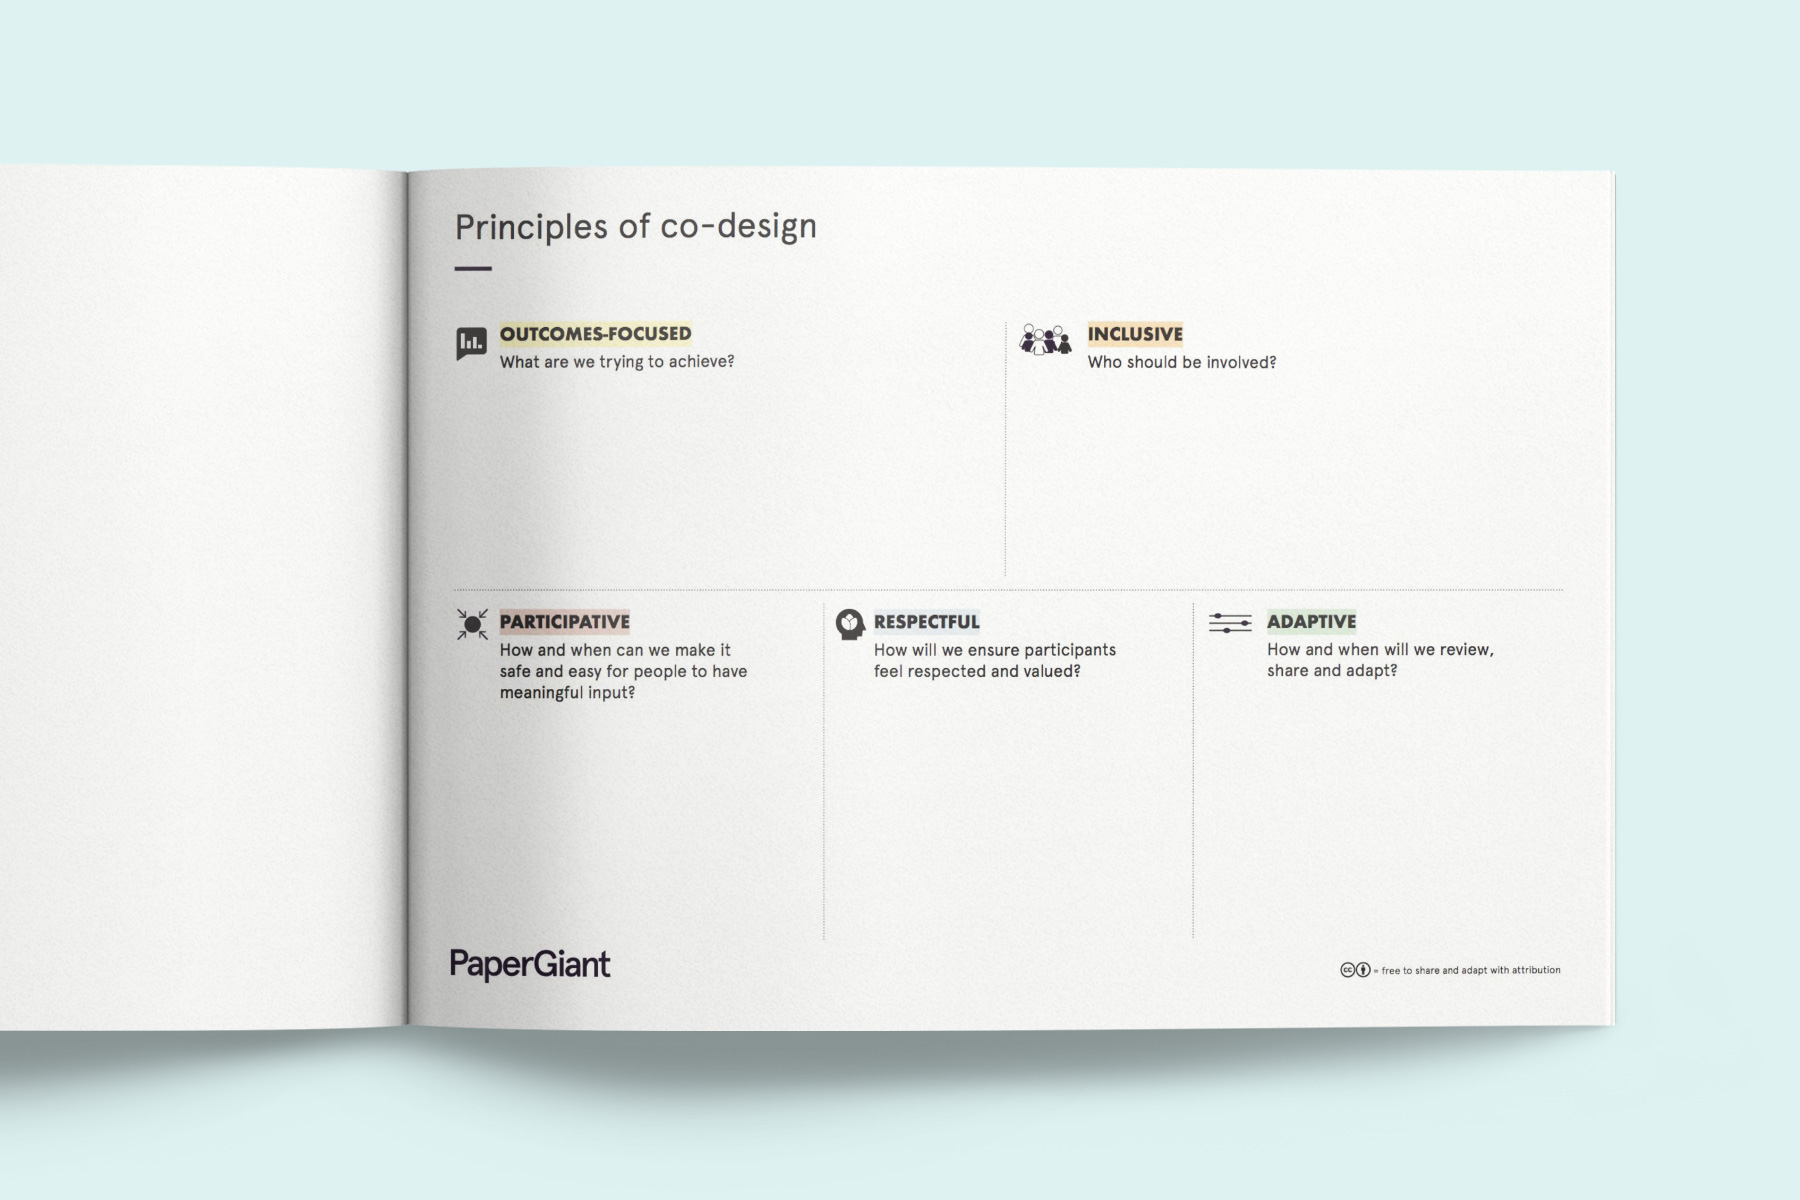 A spread from the HCD toolkit showing the 5 principles of good co-design.